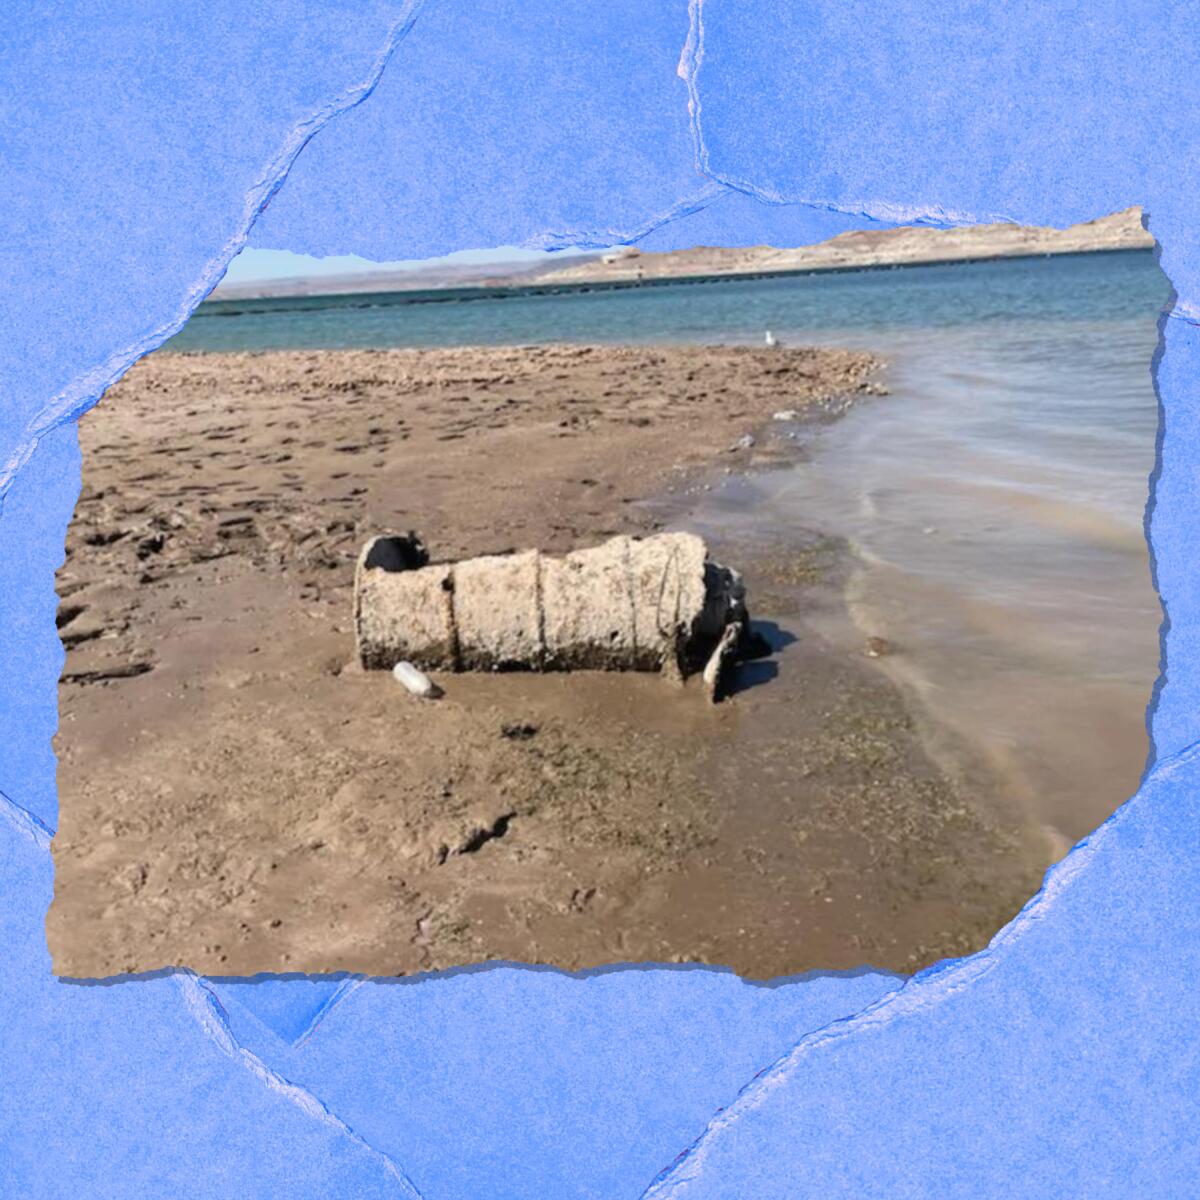 A rusted barrel is seen on a muddy lakeshore.